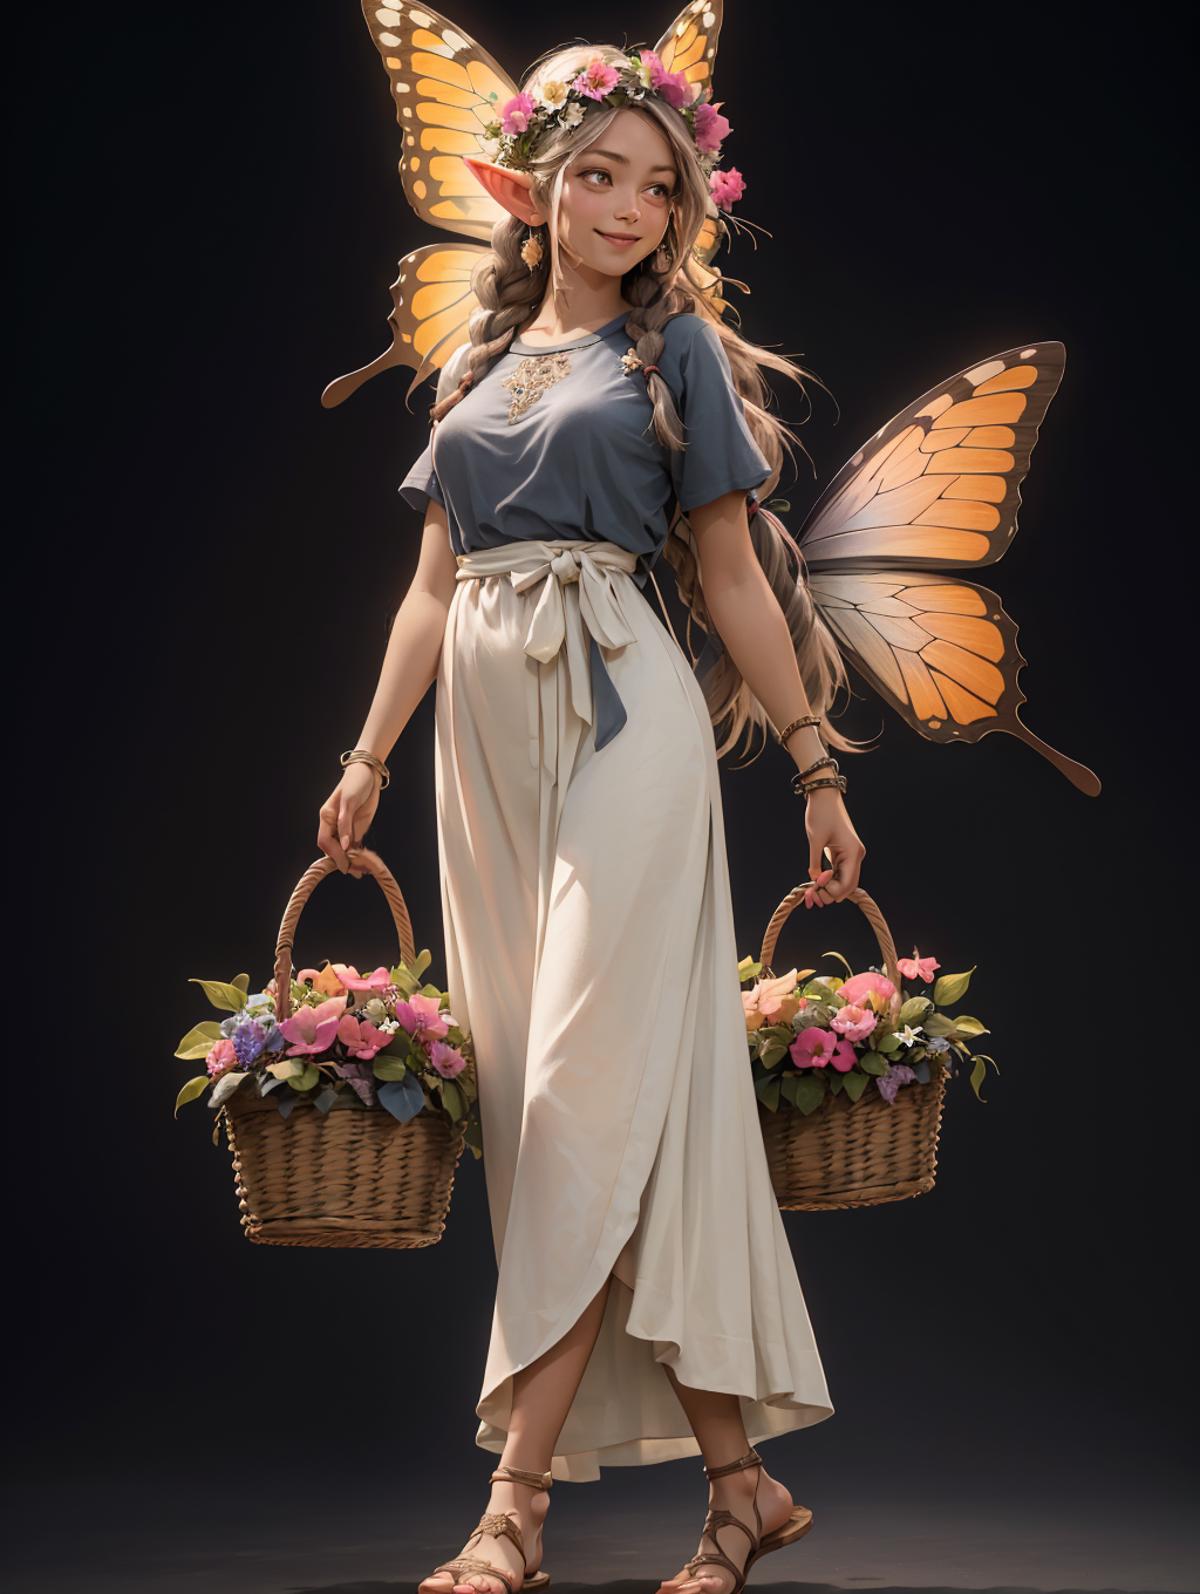 Butterfly fairy image by A_banana